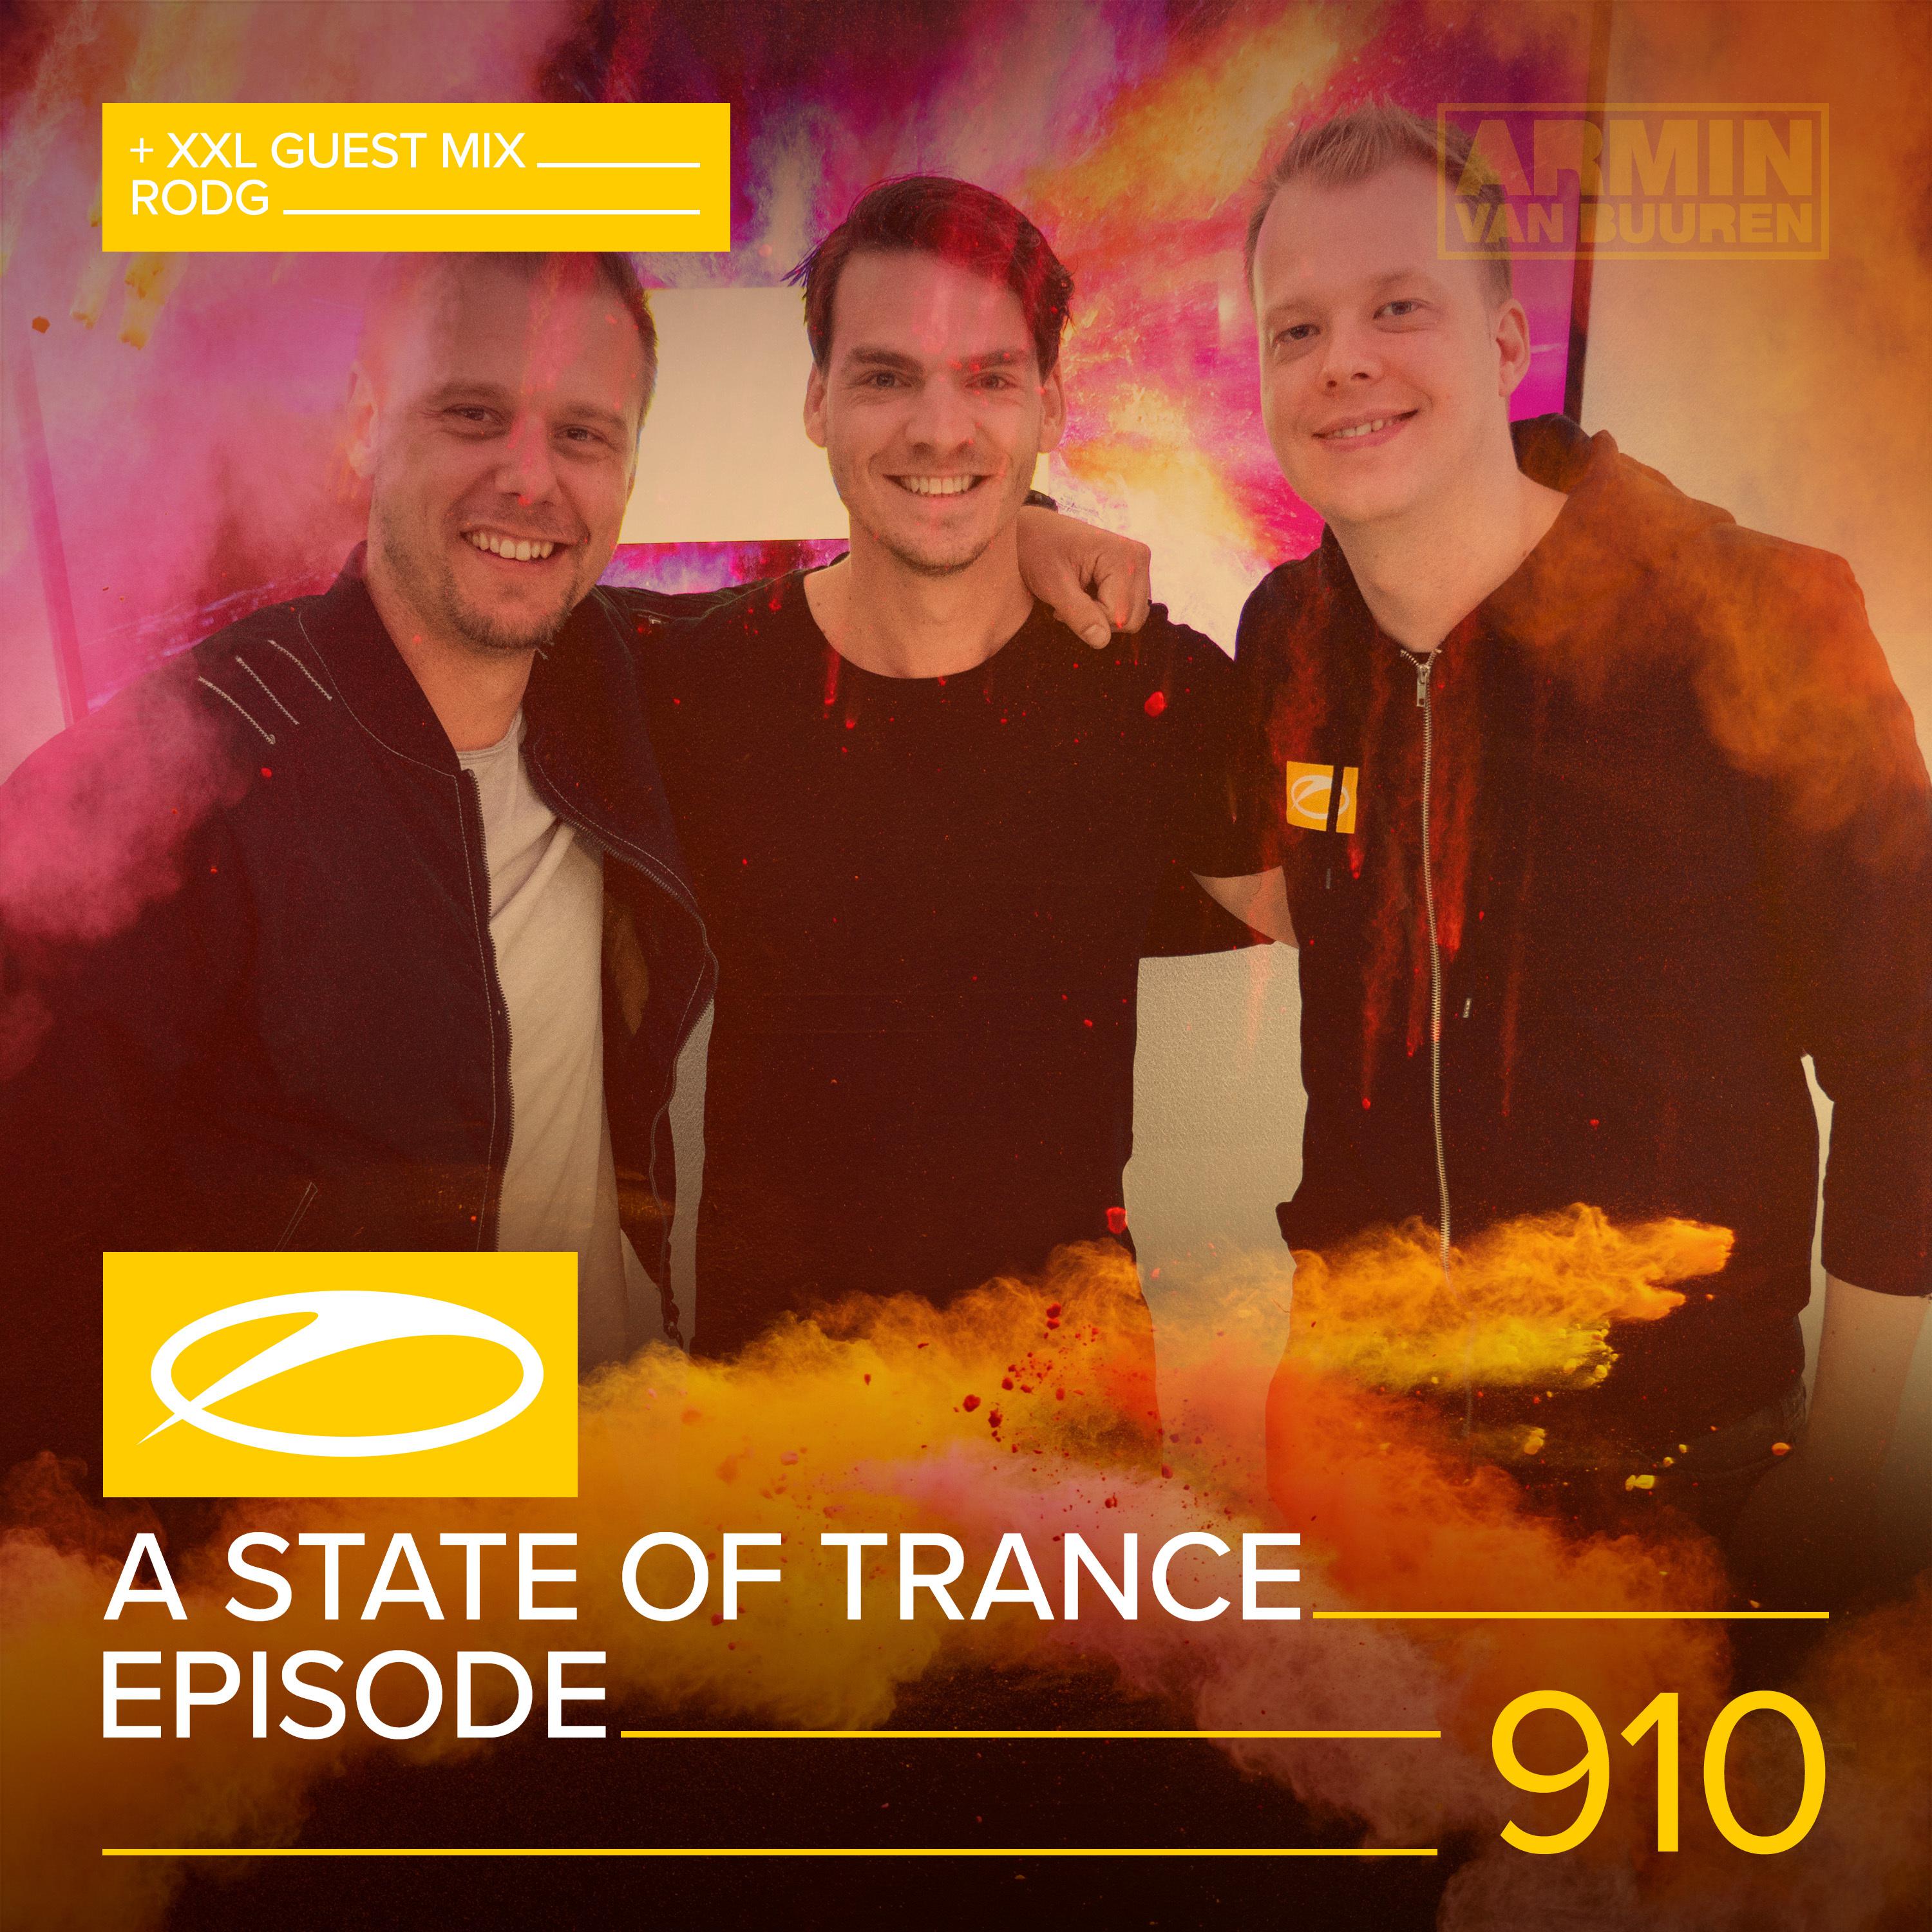 ASOT 910 - A State Of Trance Episode 910 (+XXL Guest Mix: Rodg)专辑